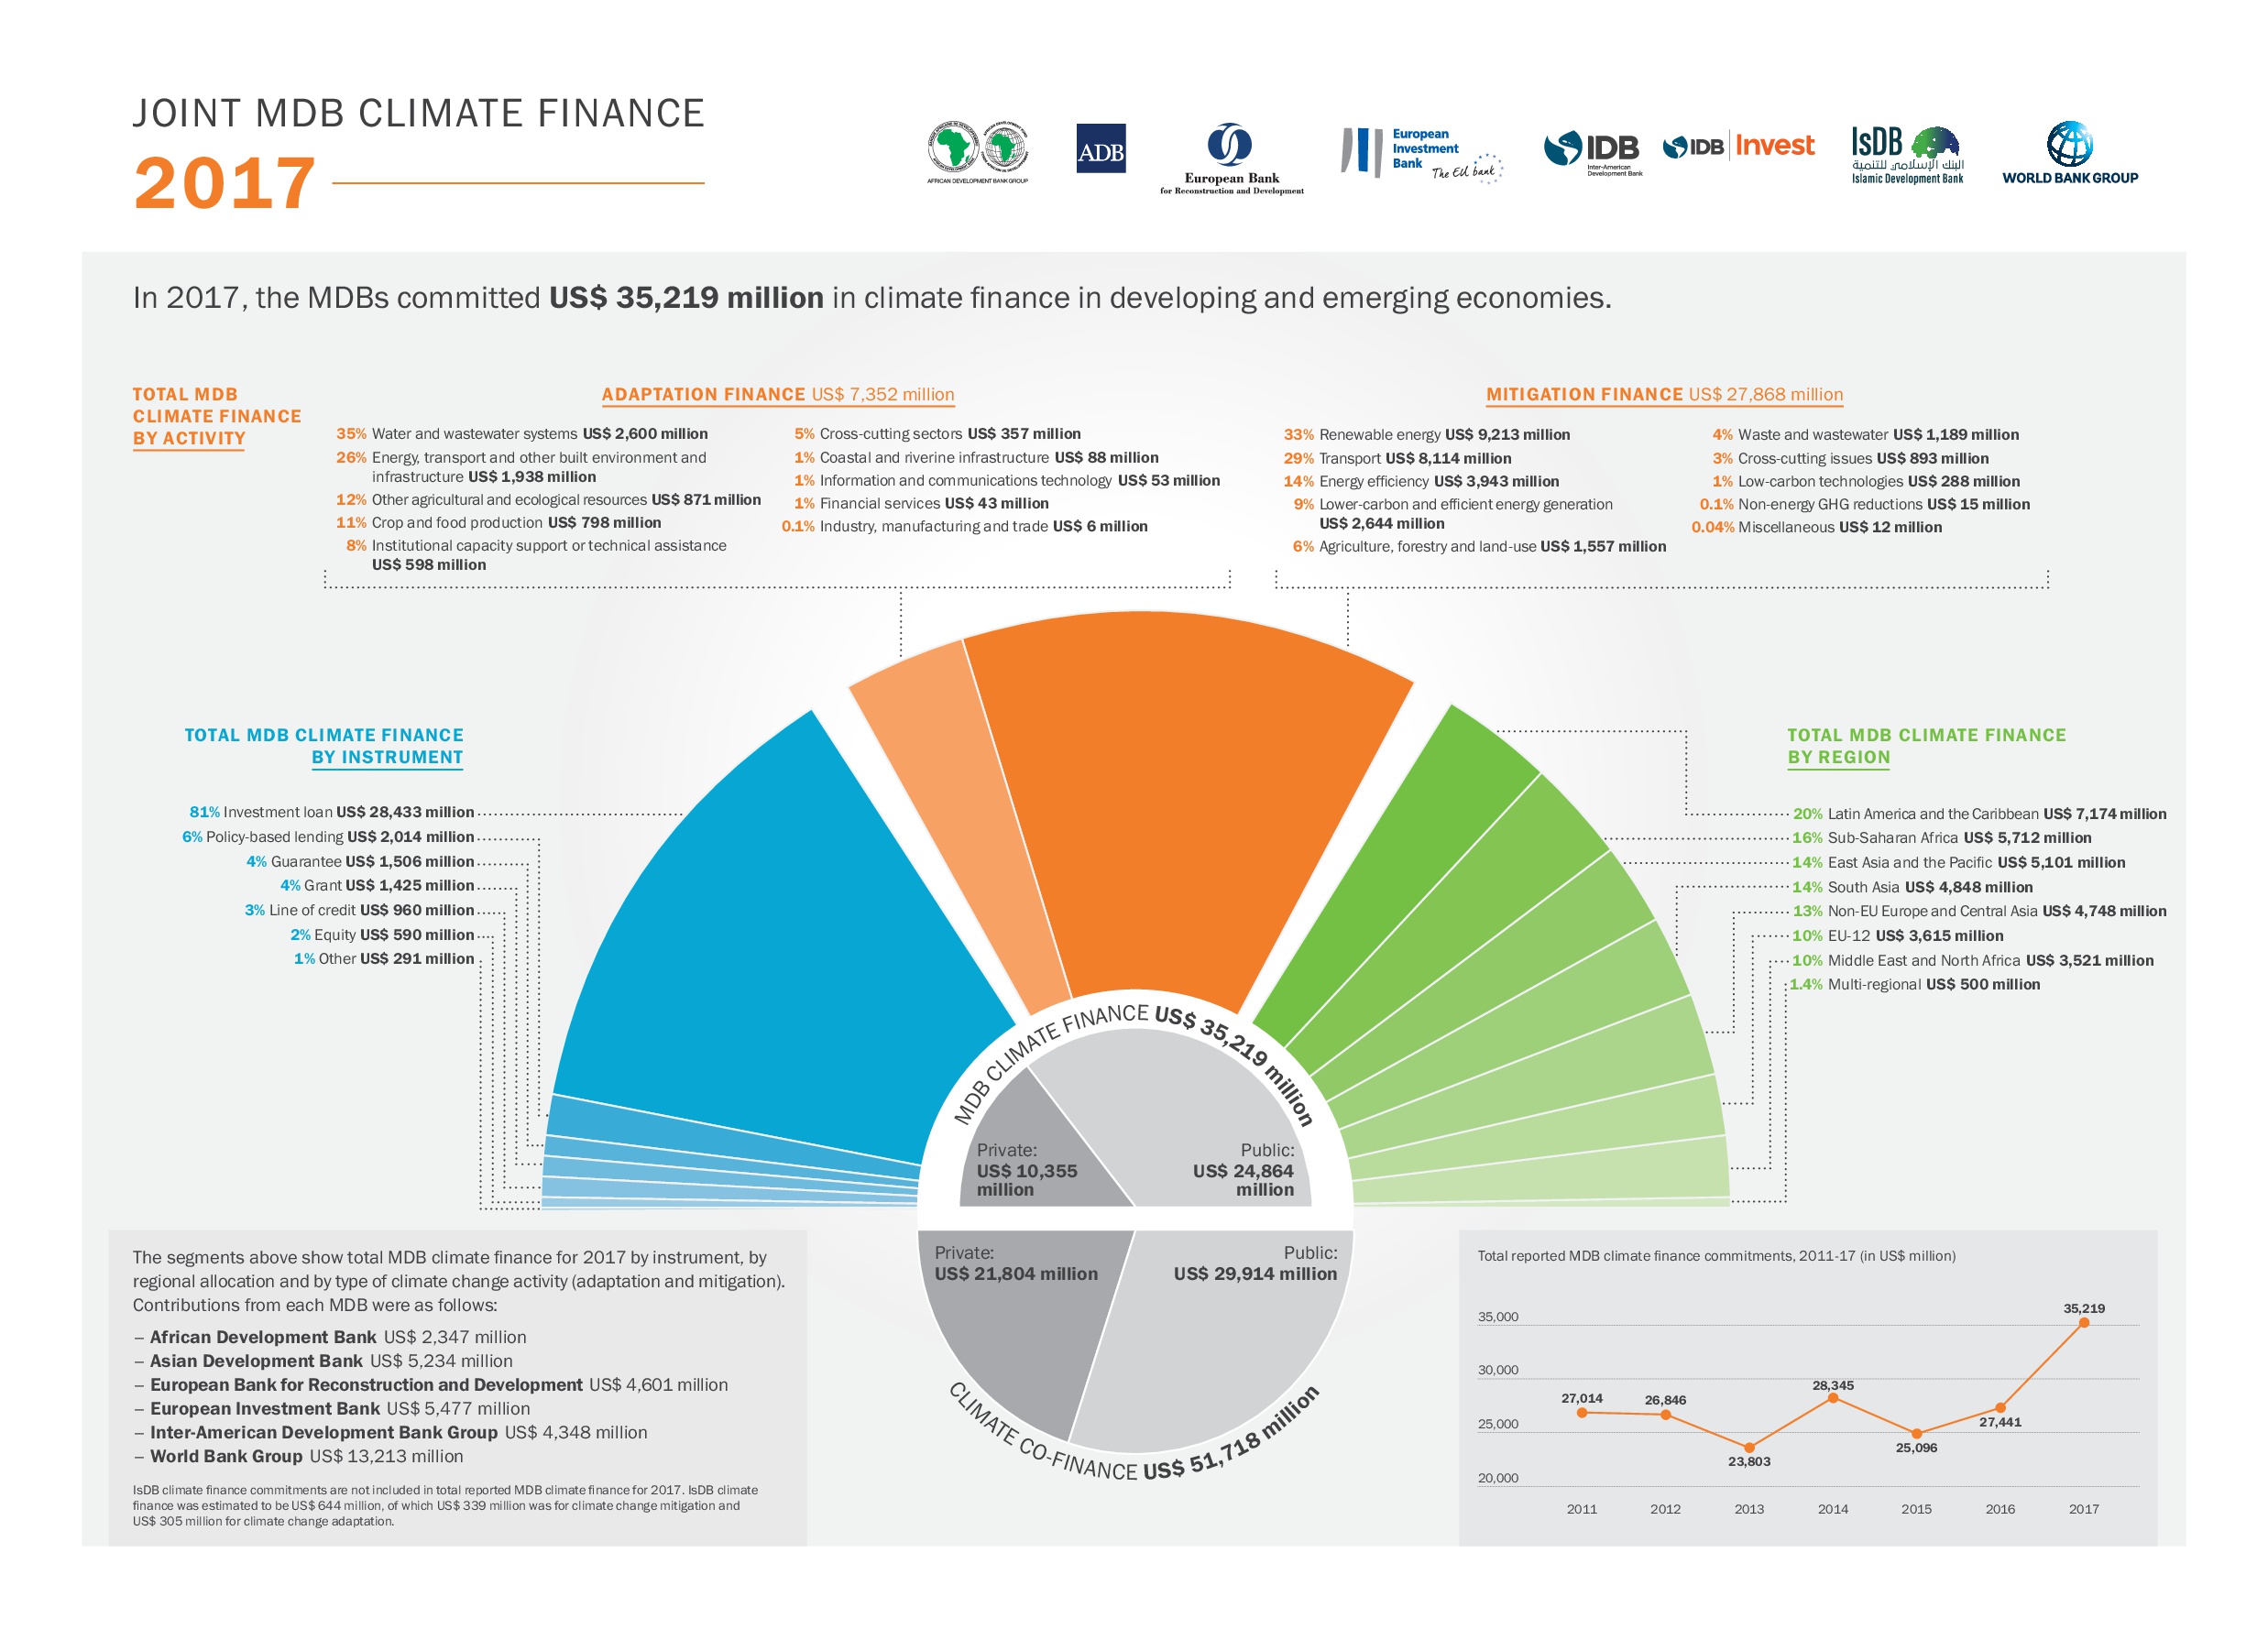 Key Figures from the 2017 Joint Report on Multilateral Development Banks' Climate Finance